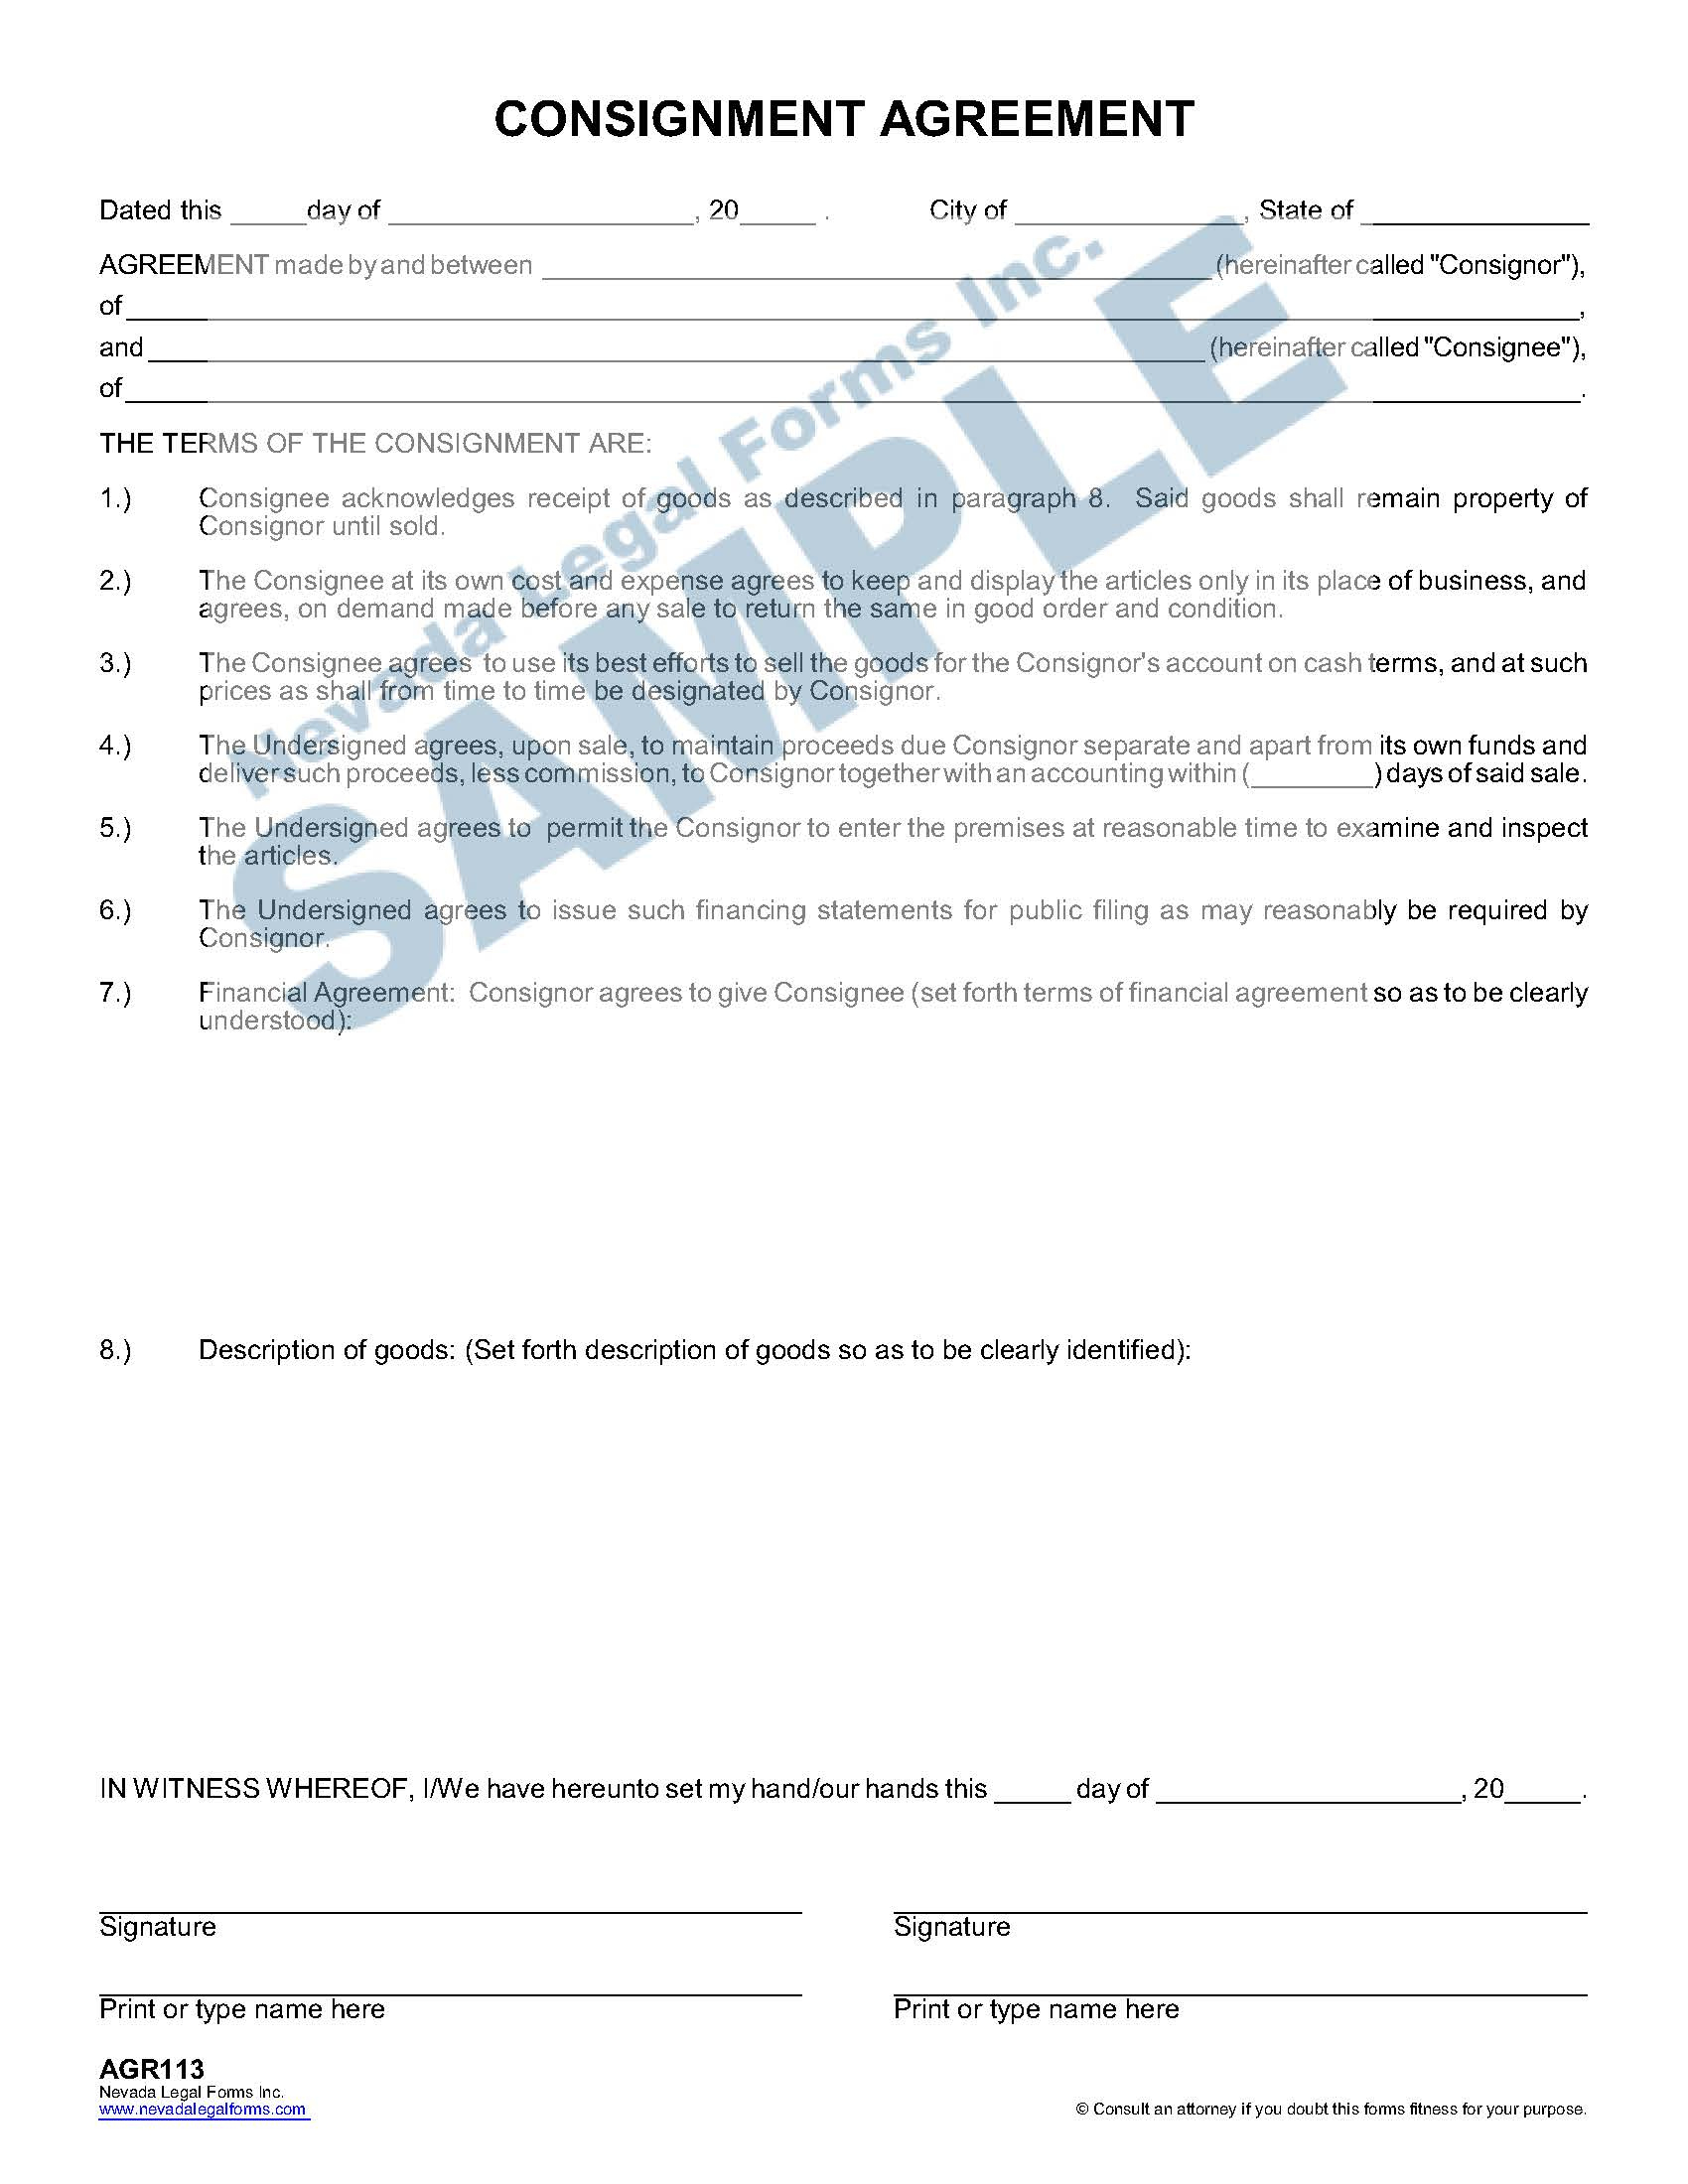 Consignment Agreement | Nevada Legal Forms &amp; Services for Fantastic Horse Adoption Contract Template